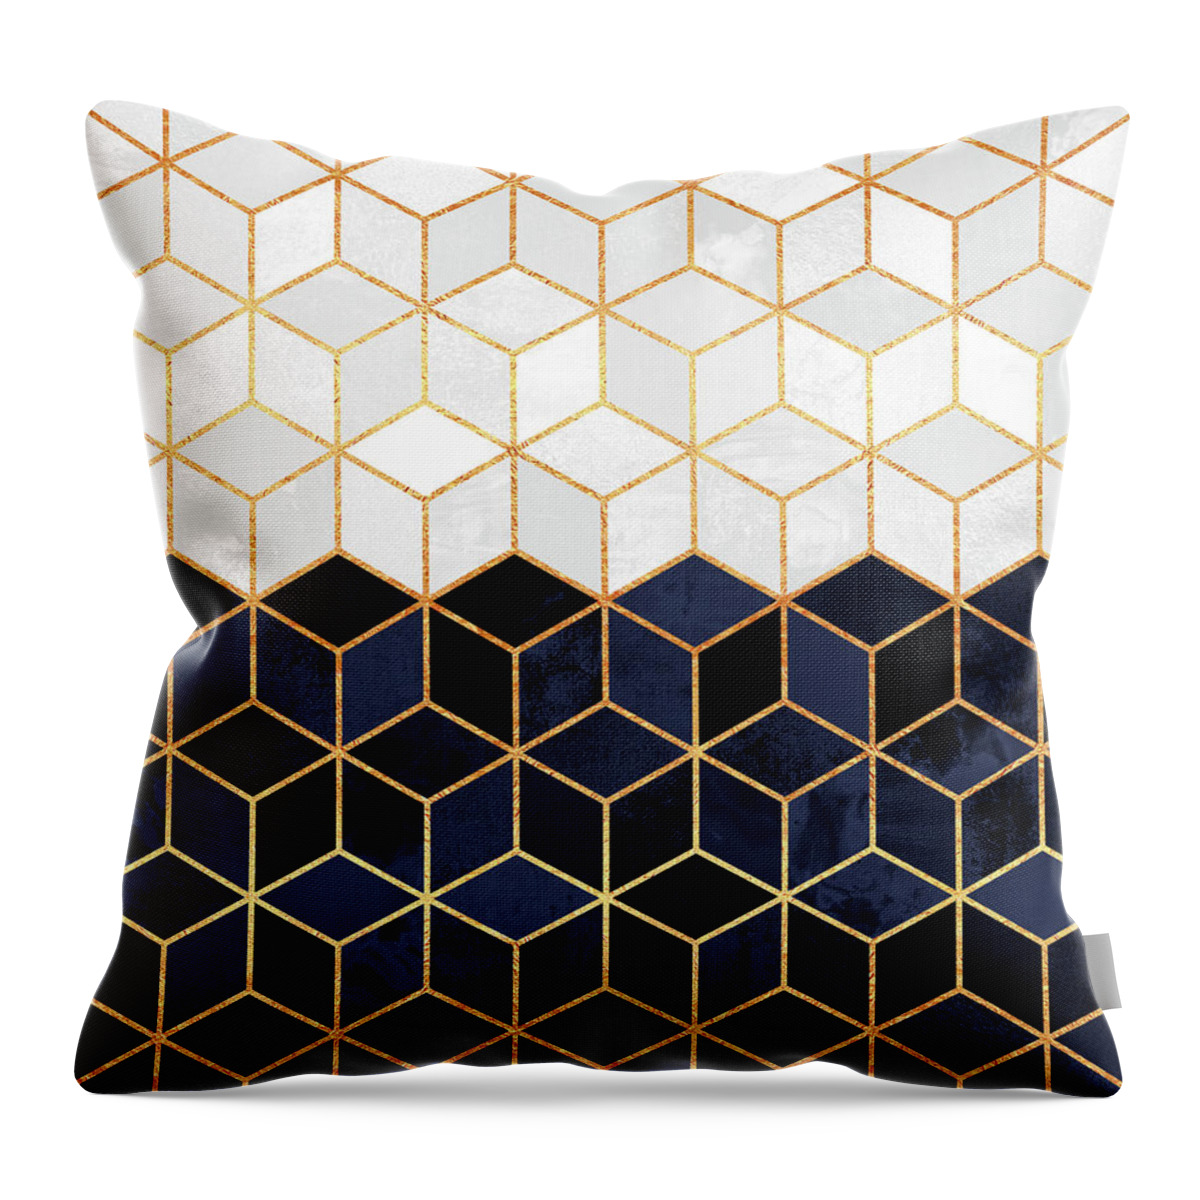 Graphic Throw Pillow featuring the digital art White and navy cubes by Elisabeth Fredriksson